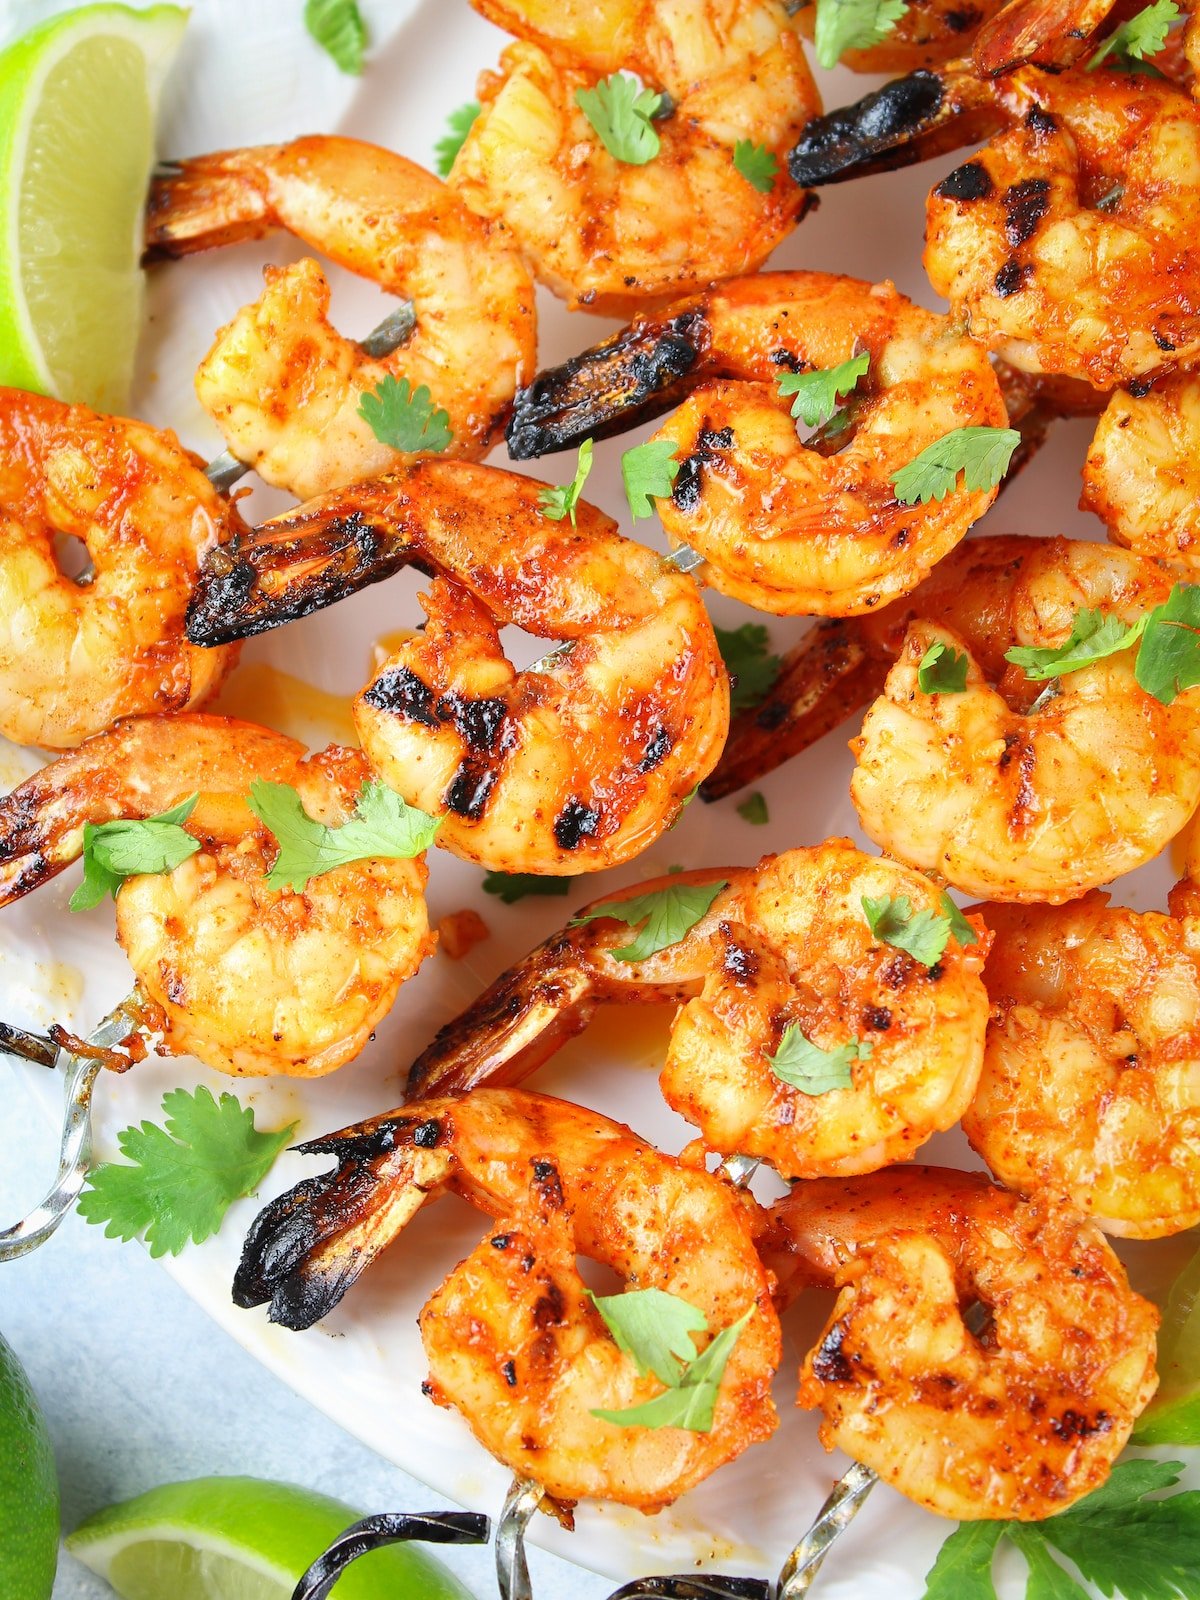 A close-up photo of cooked shrimp on skewers.